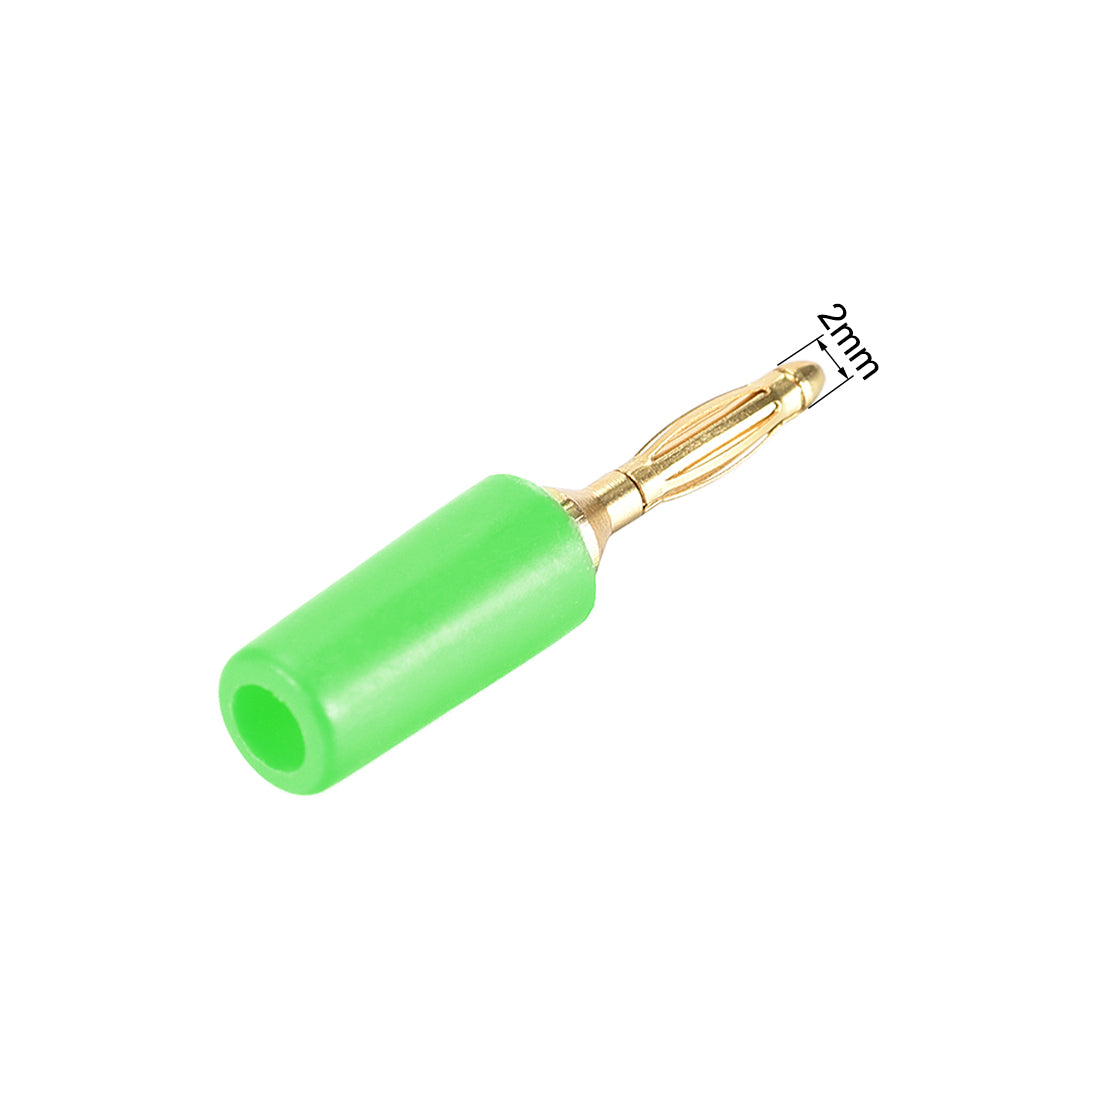 uxcell Uxcell 2mm Banana Speaker Wire Cable Plugs Connectors Gold Green 5pcs Jack Connector